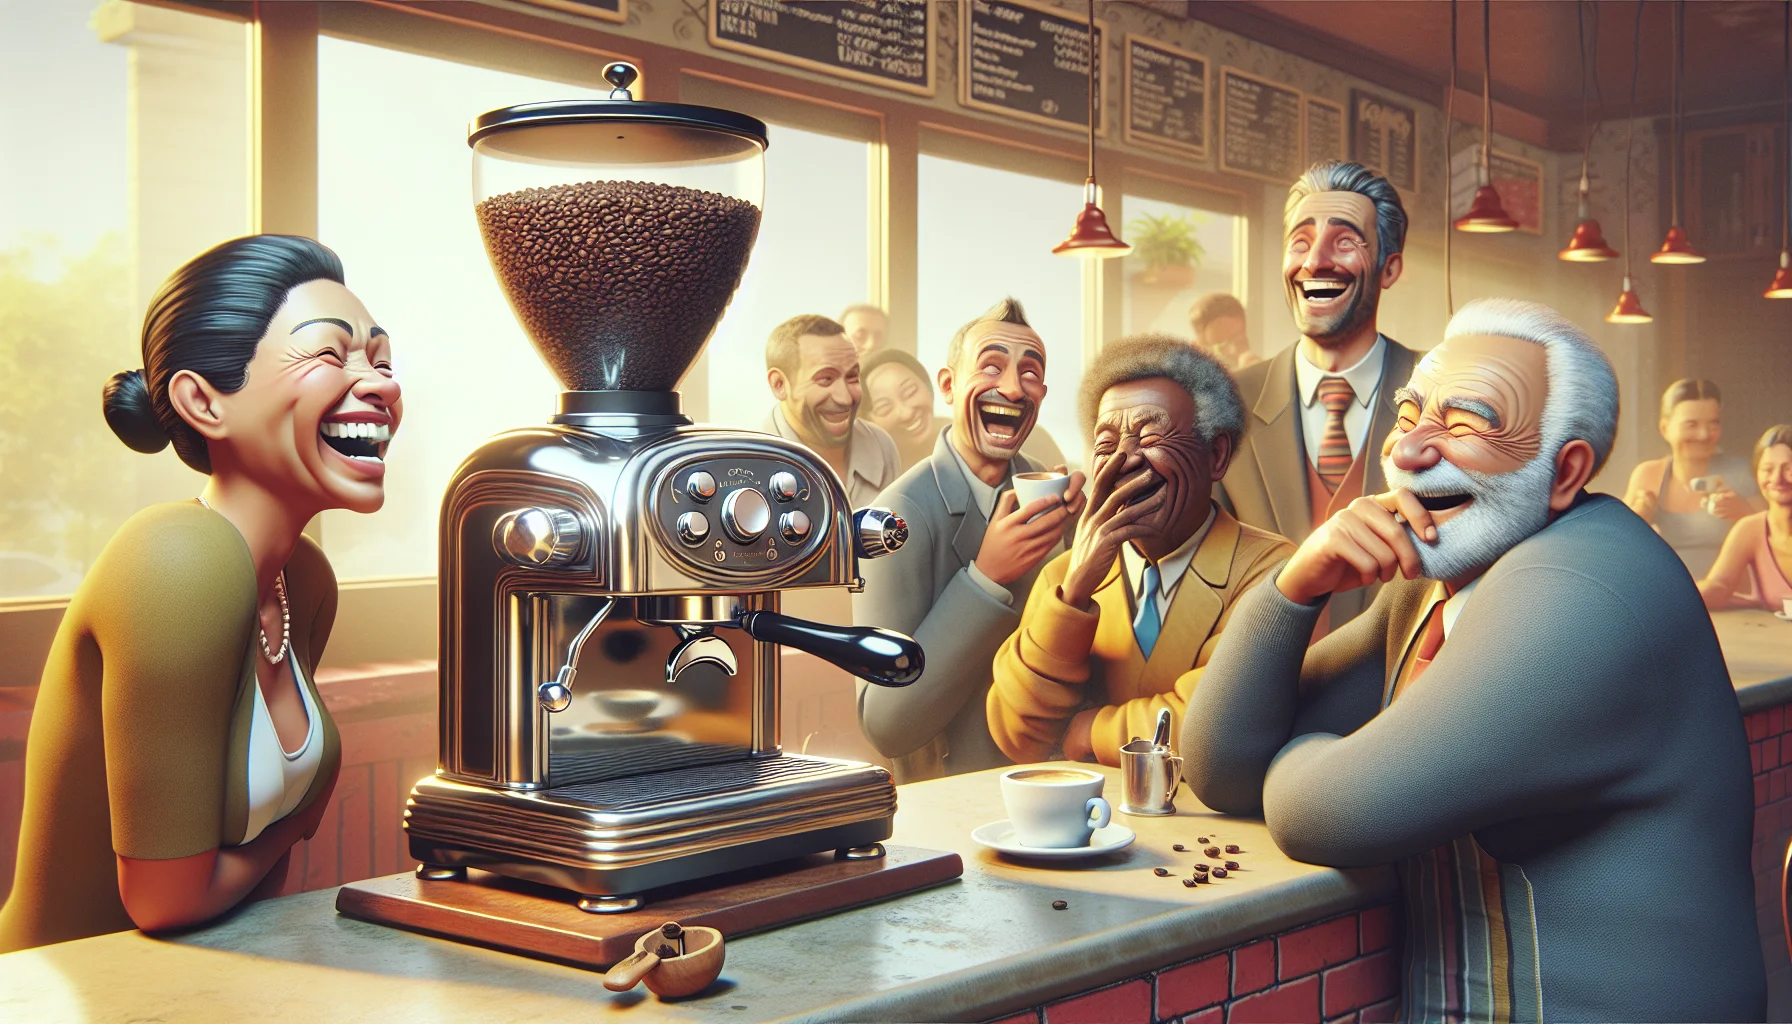 Visualize a humorous scene in a cafe setting. A vintage-style espresso machine, polished to a brilliant shine, stands on the countertop. Next to it is a grinder, overflowing with fragrant, freshly ground coffee beans. The espresso machine and grinder are whimsically animated and seem to be entertaining a diverse group of amused customers. A Hispanic woman, chuckling heartily, waits for her drink while a Middle-Eastern man, barely suppressing his laughter, takes a sip of his coffee. An elderly Caucasian gentleman silently watches the comedic spectacle, a broad smile on his face.